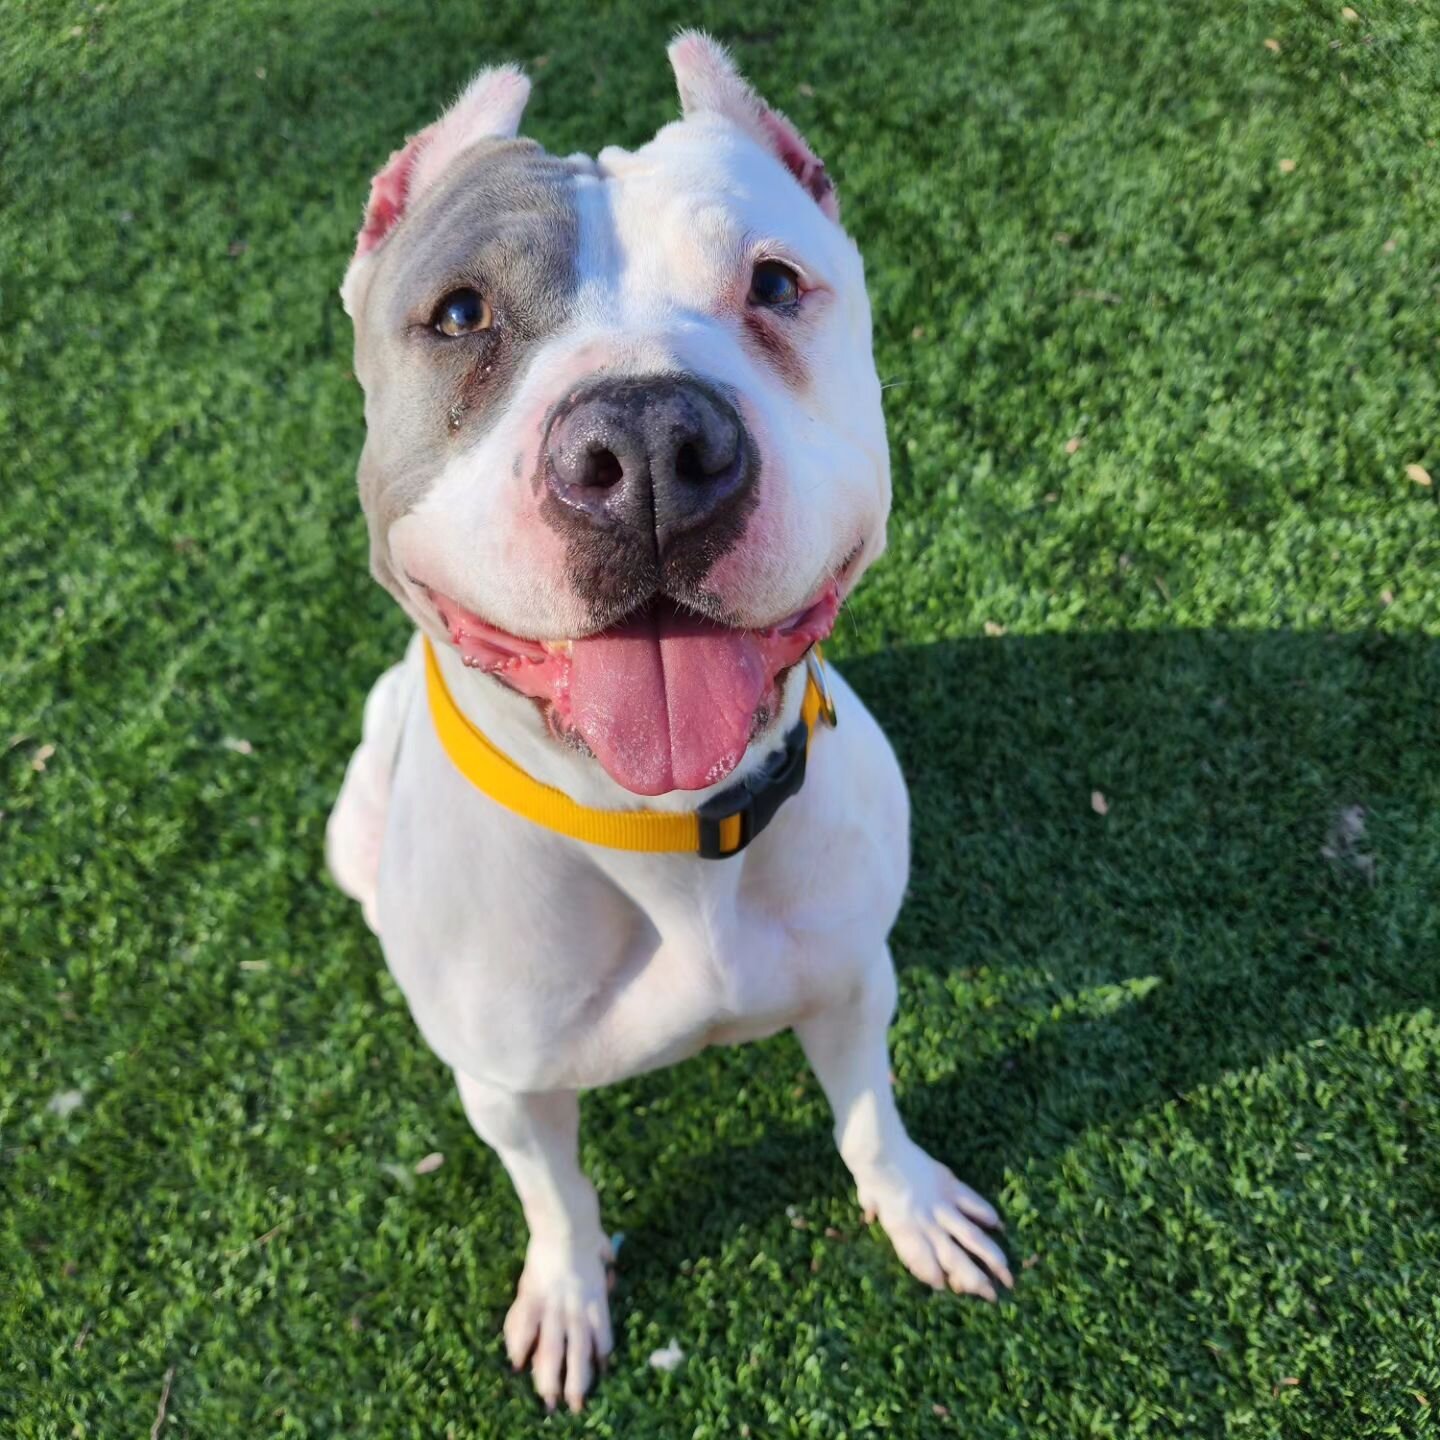 Introducing Sparkle, #A5510735! Sparkle is a 2nd chance transfer pup from the Lancaster Animal Care Center &amp; she is ready to find a home!&nbsp; 

Homeless Animals provided funding for Sparkle to visit @oaksvetcare when she was observed with an od